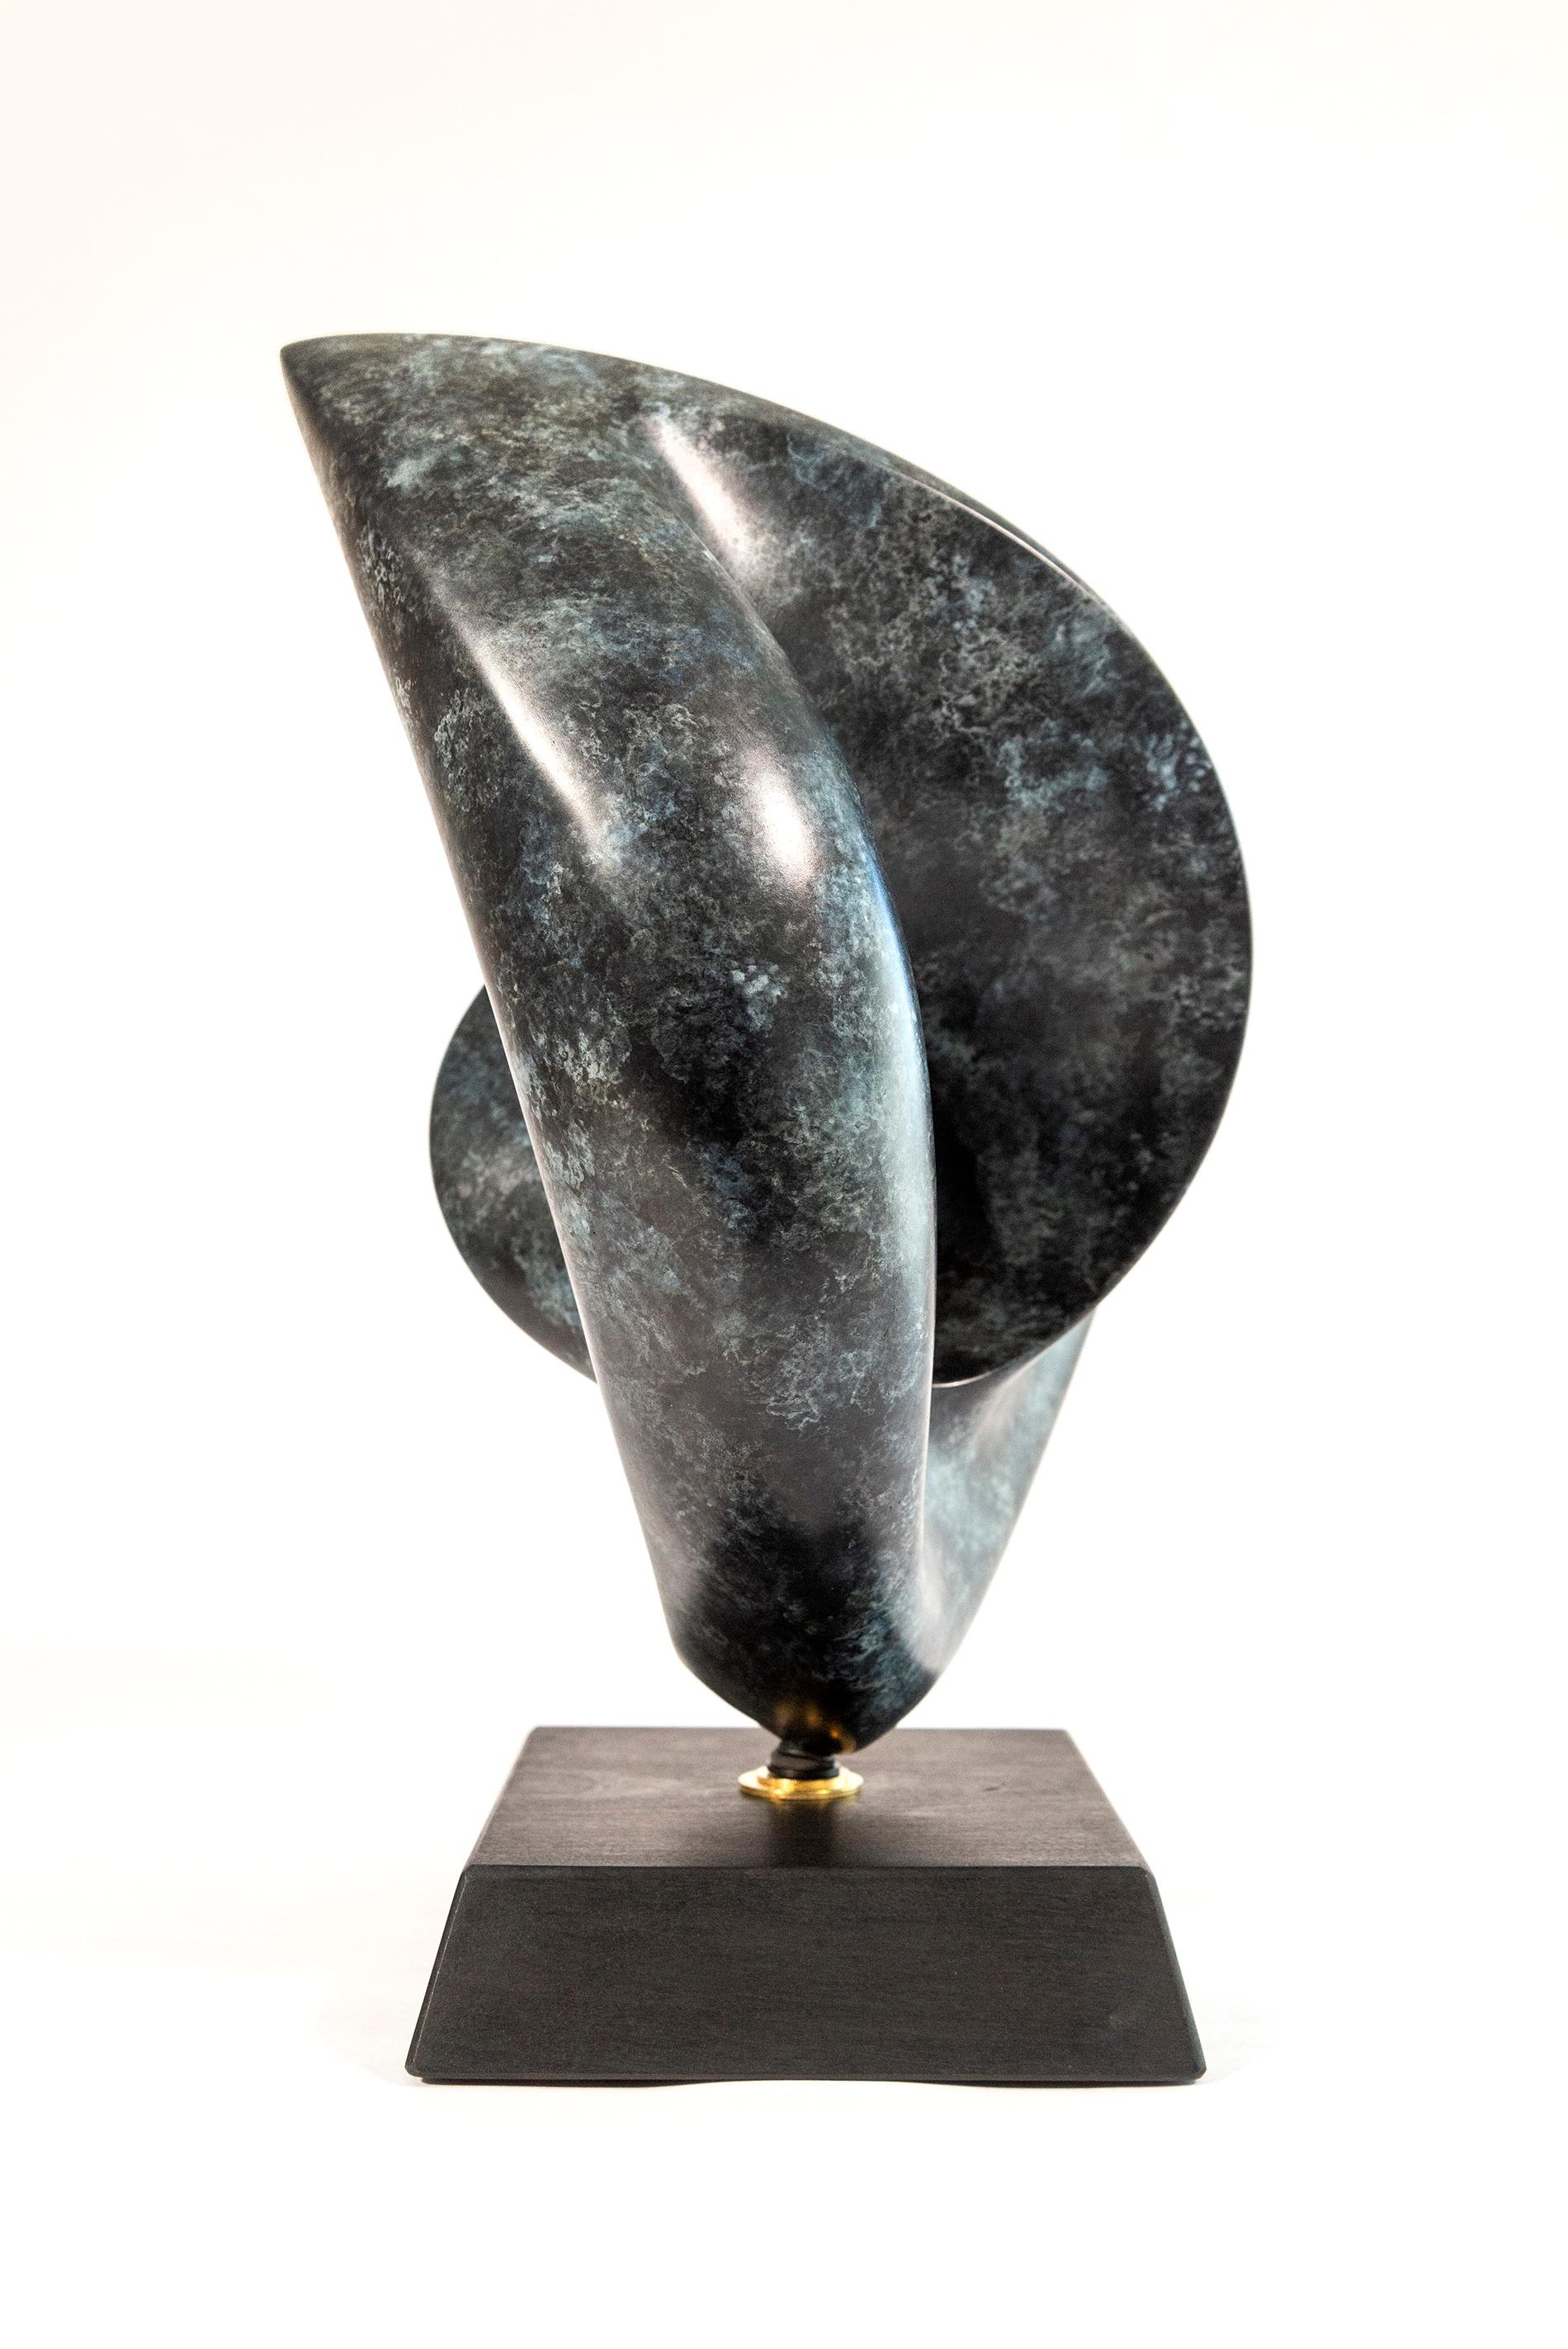 Rhapsody Ed. 1/15 - smooth, polished, abstract, bronze and mahogany sculpture - Brown Abstract Sculpture by David Chamberlain